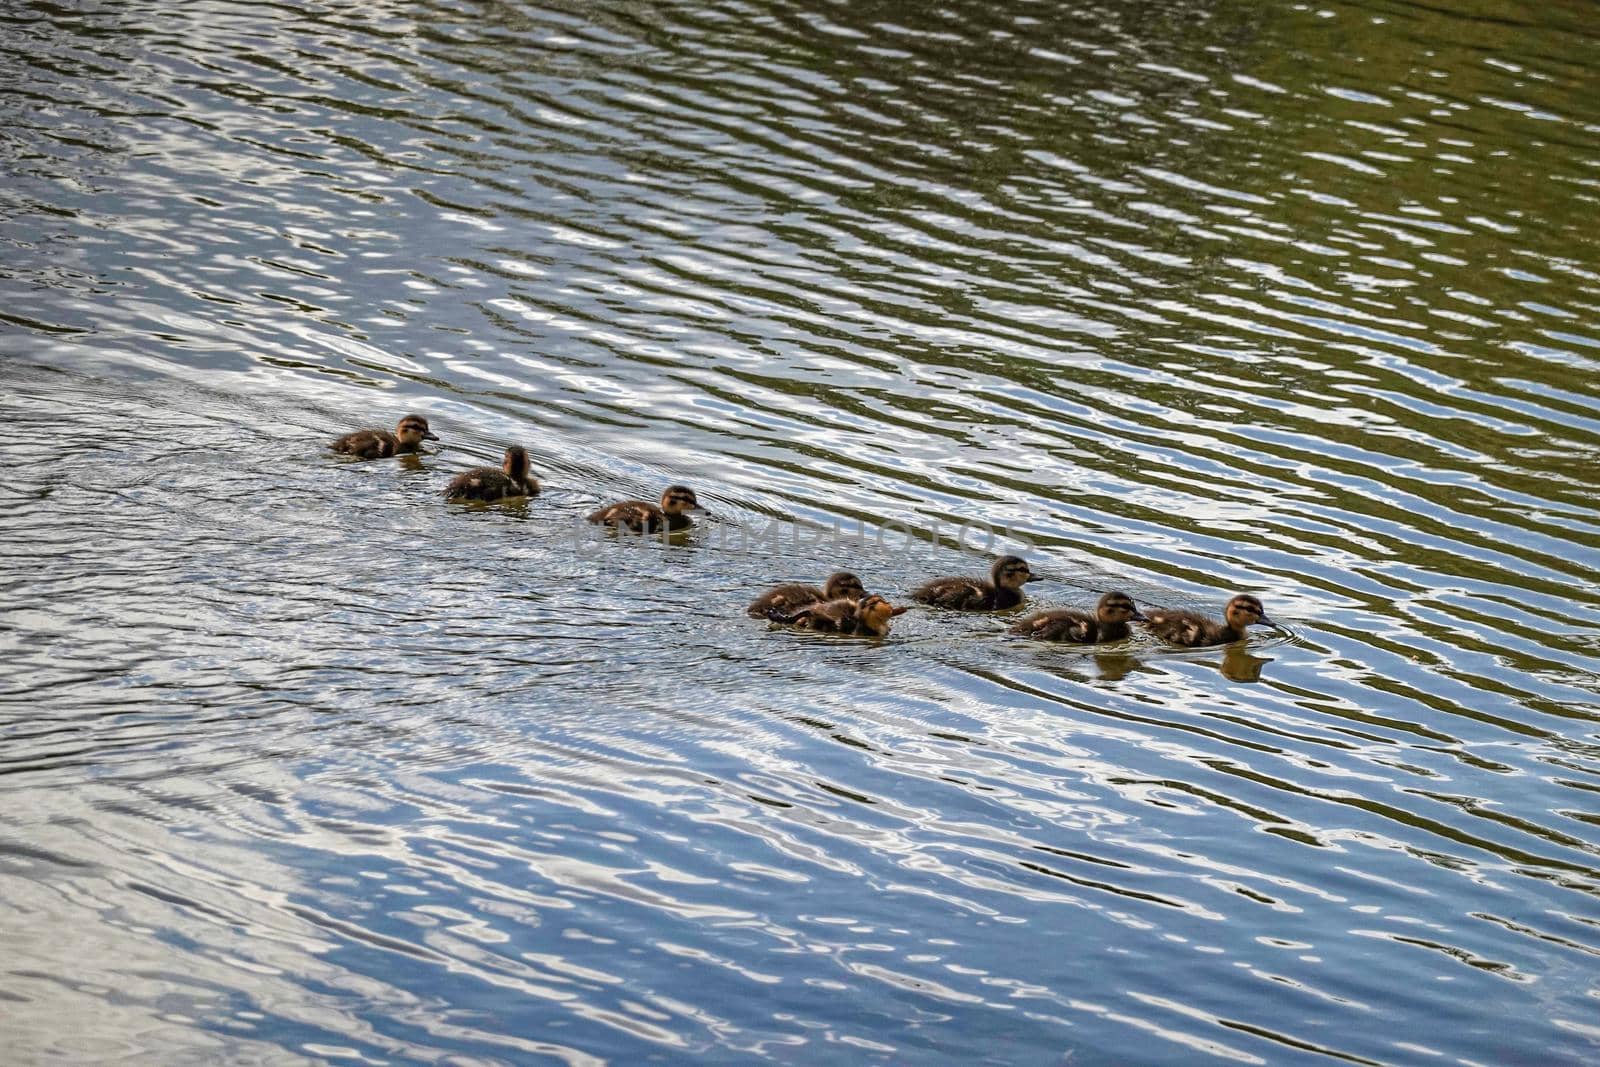 the little ducklings swim on the river in the Park